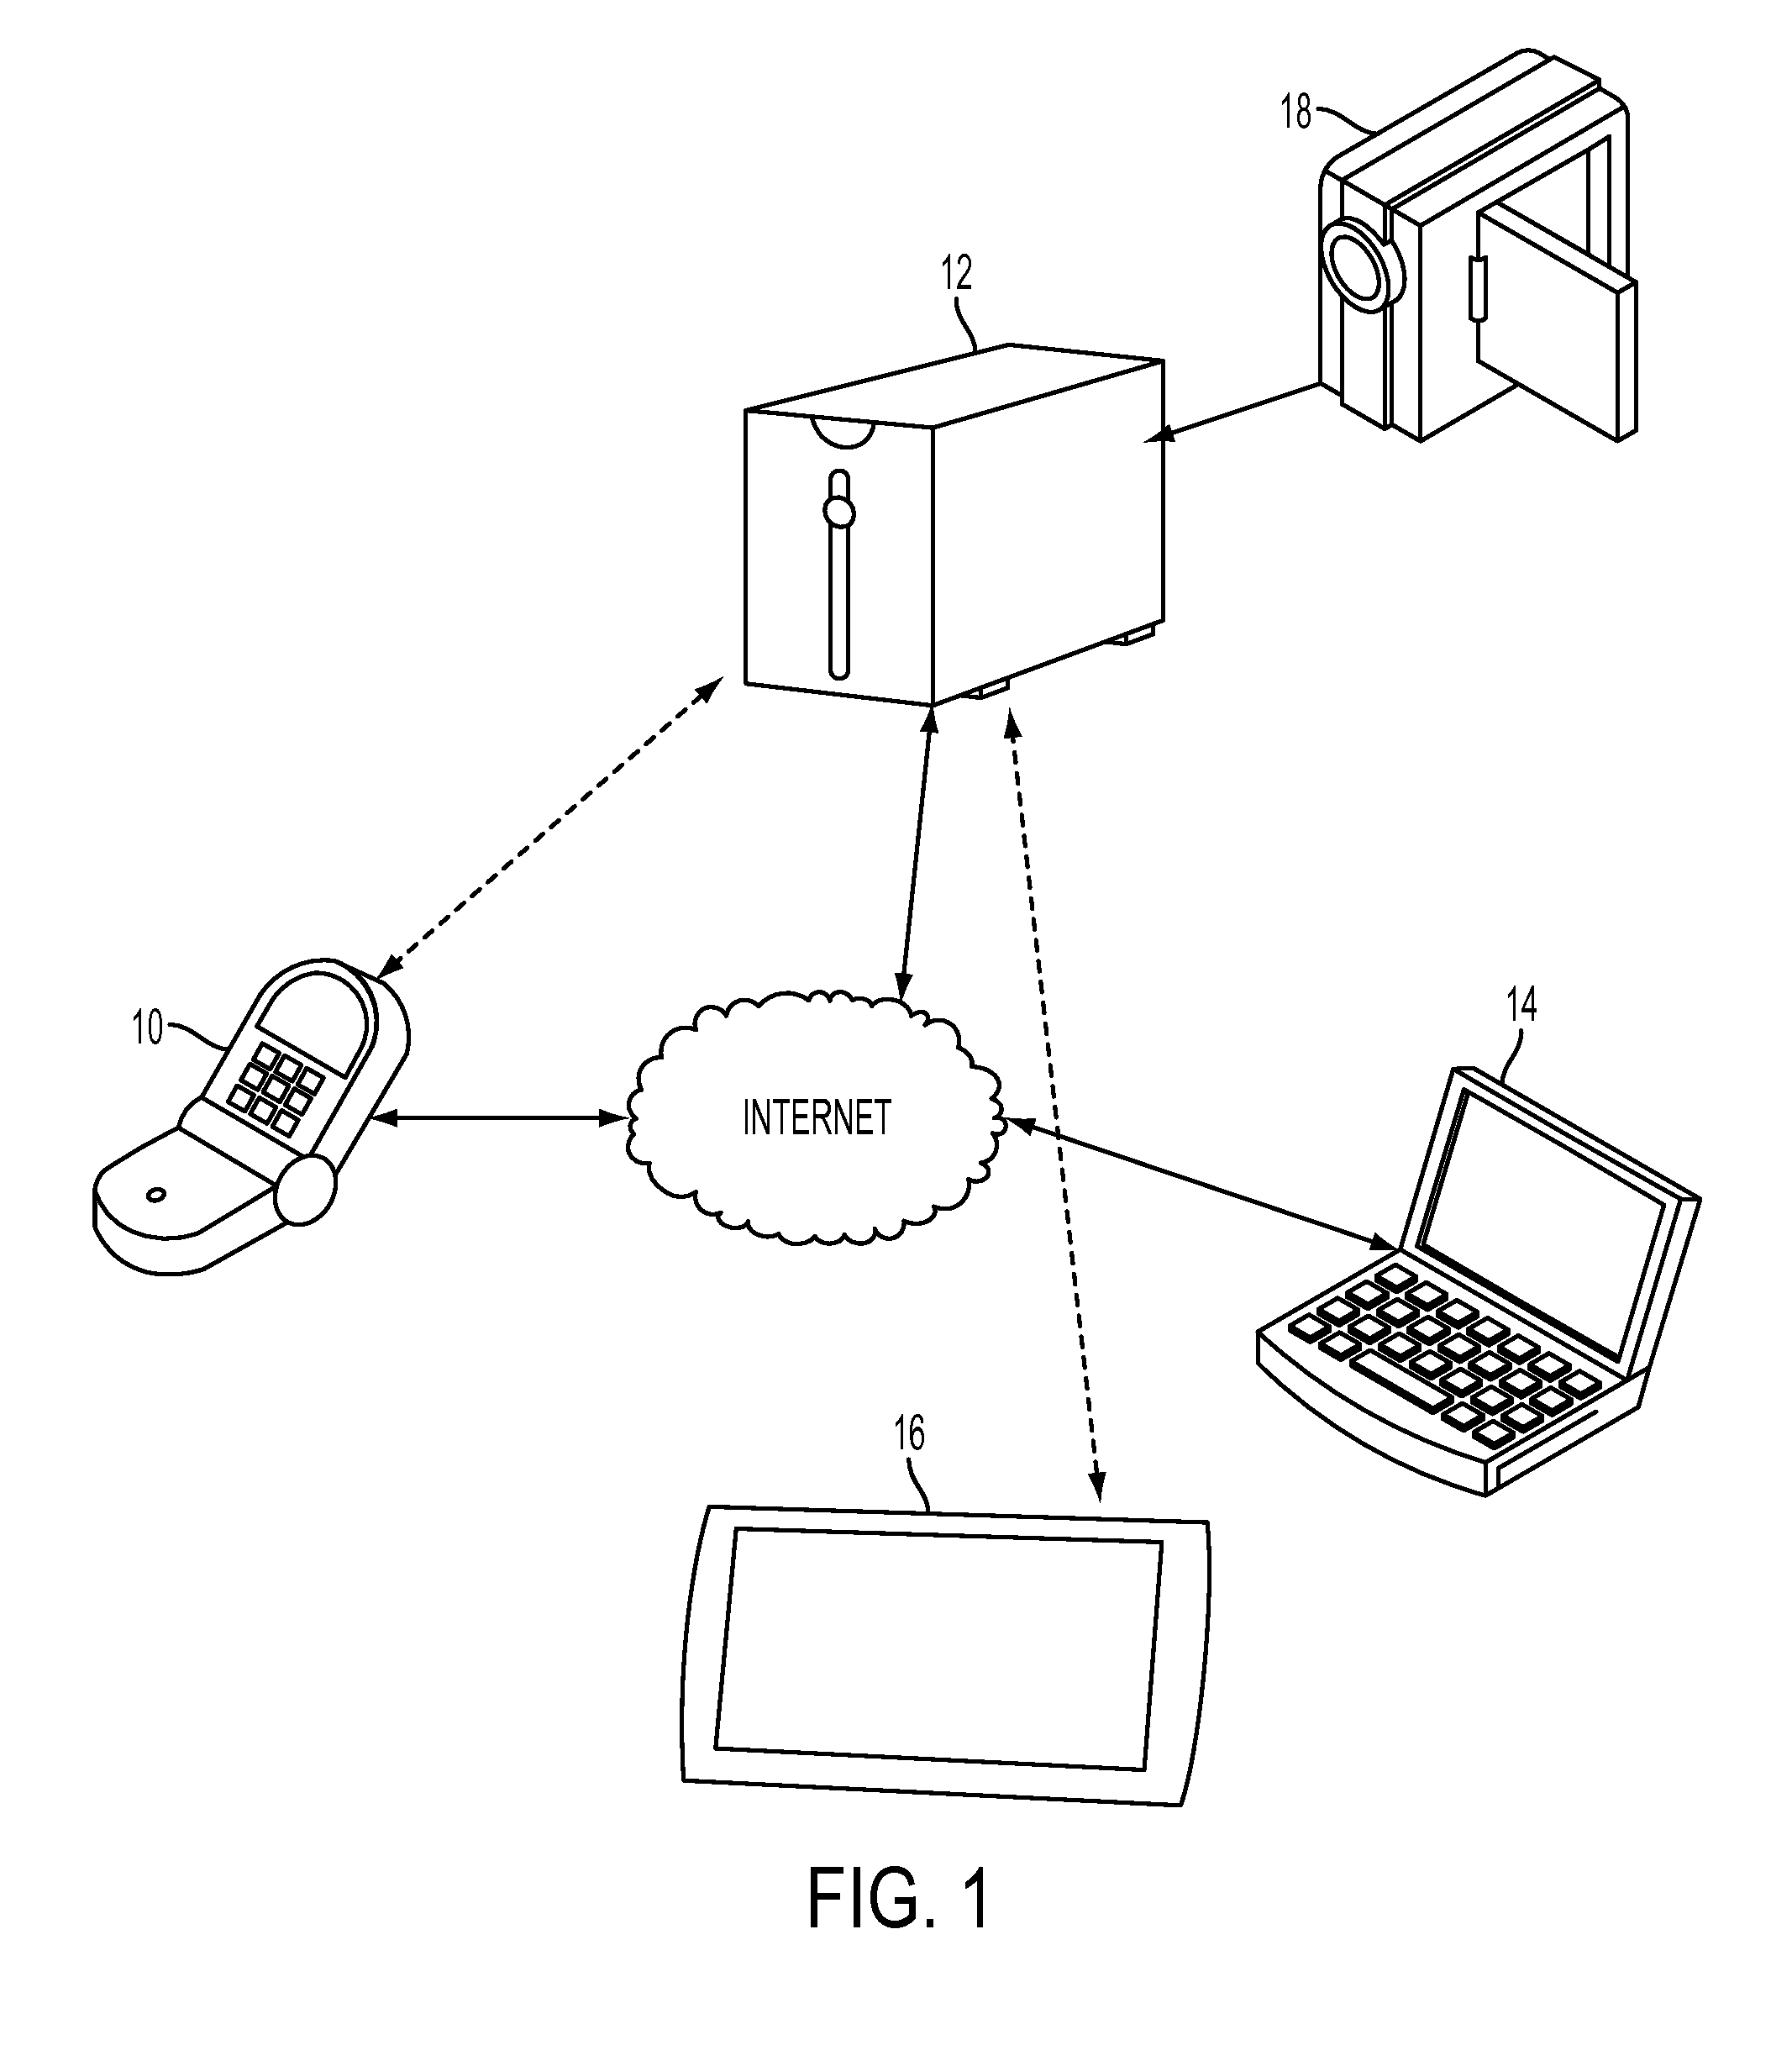 System and method for reporting and tracking incidents with a mobile device